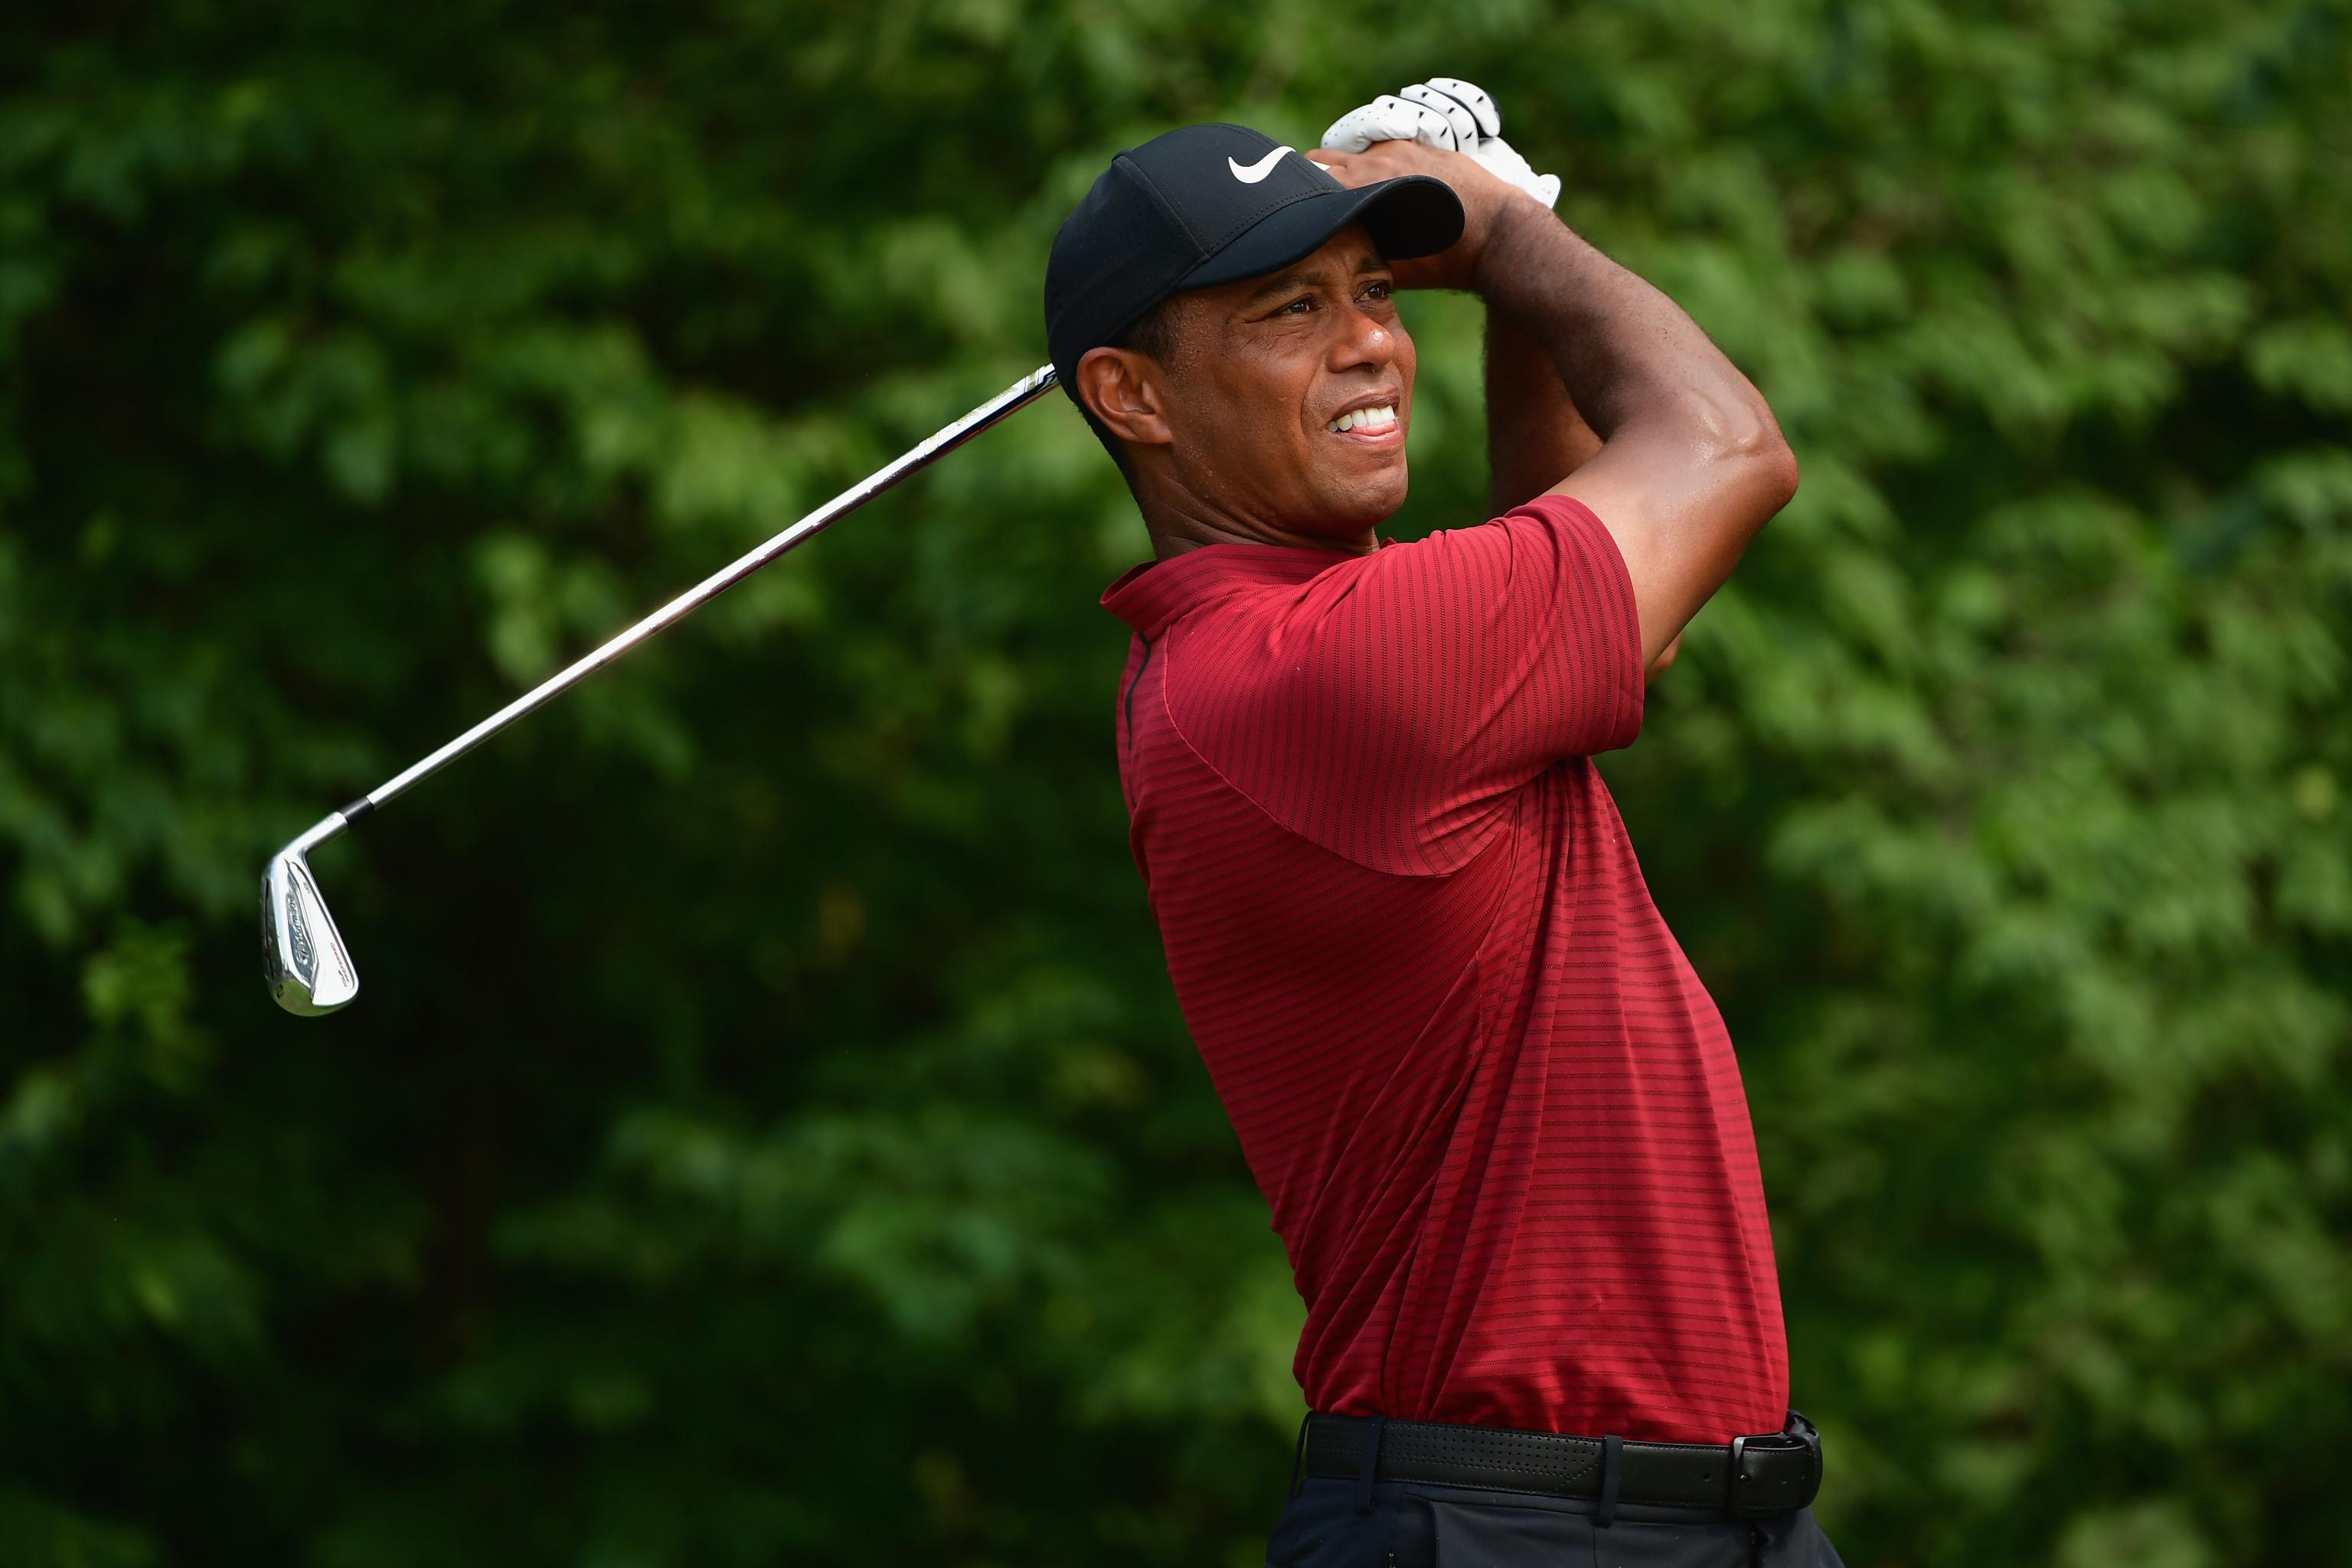 Tiger Woods At Pga Championship 2018 Live Updates For Final Holes Bleacher Report Latest News Videos And Highlights